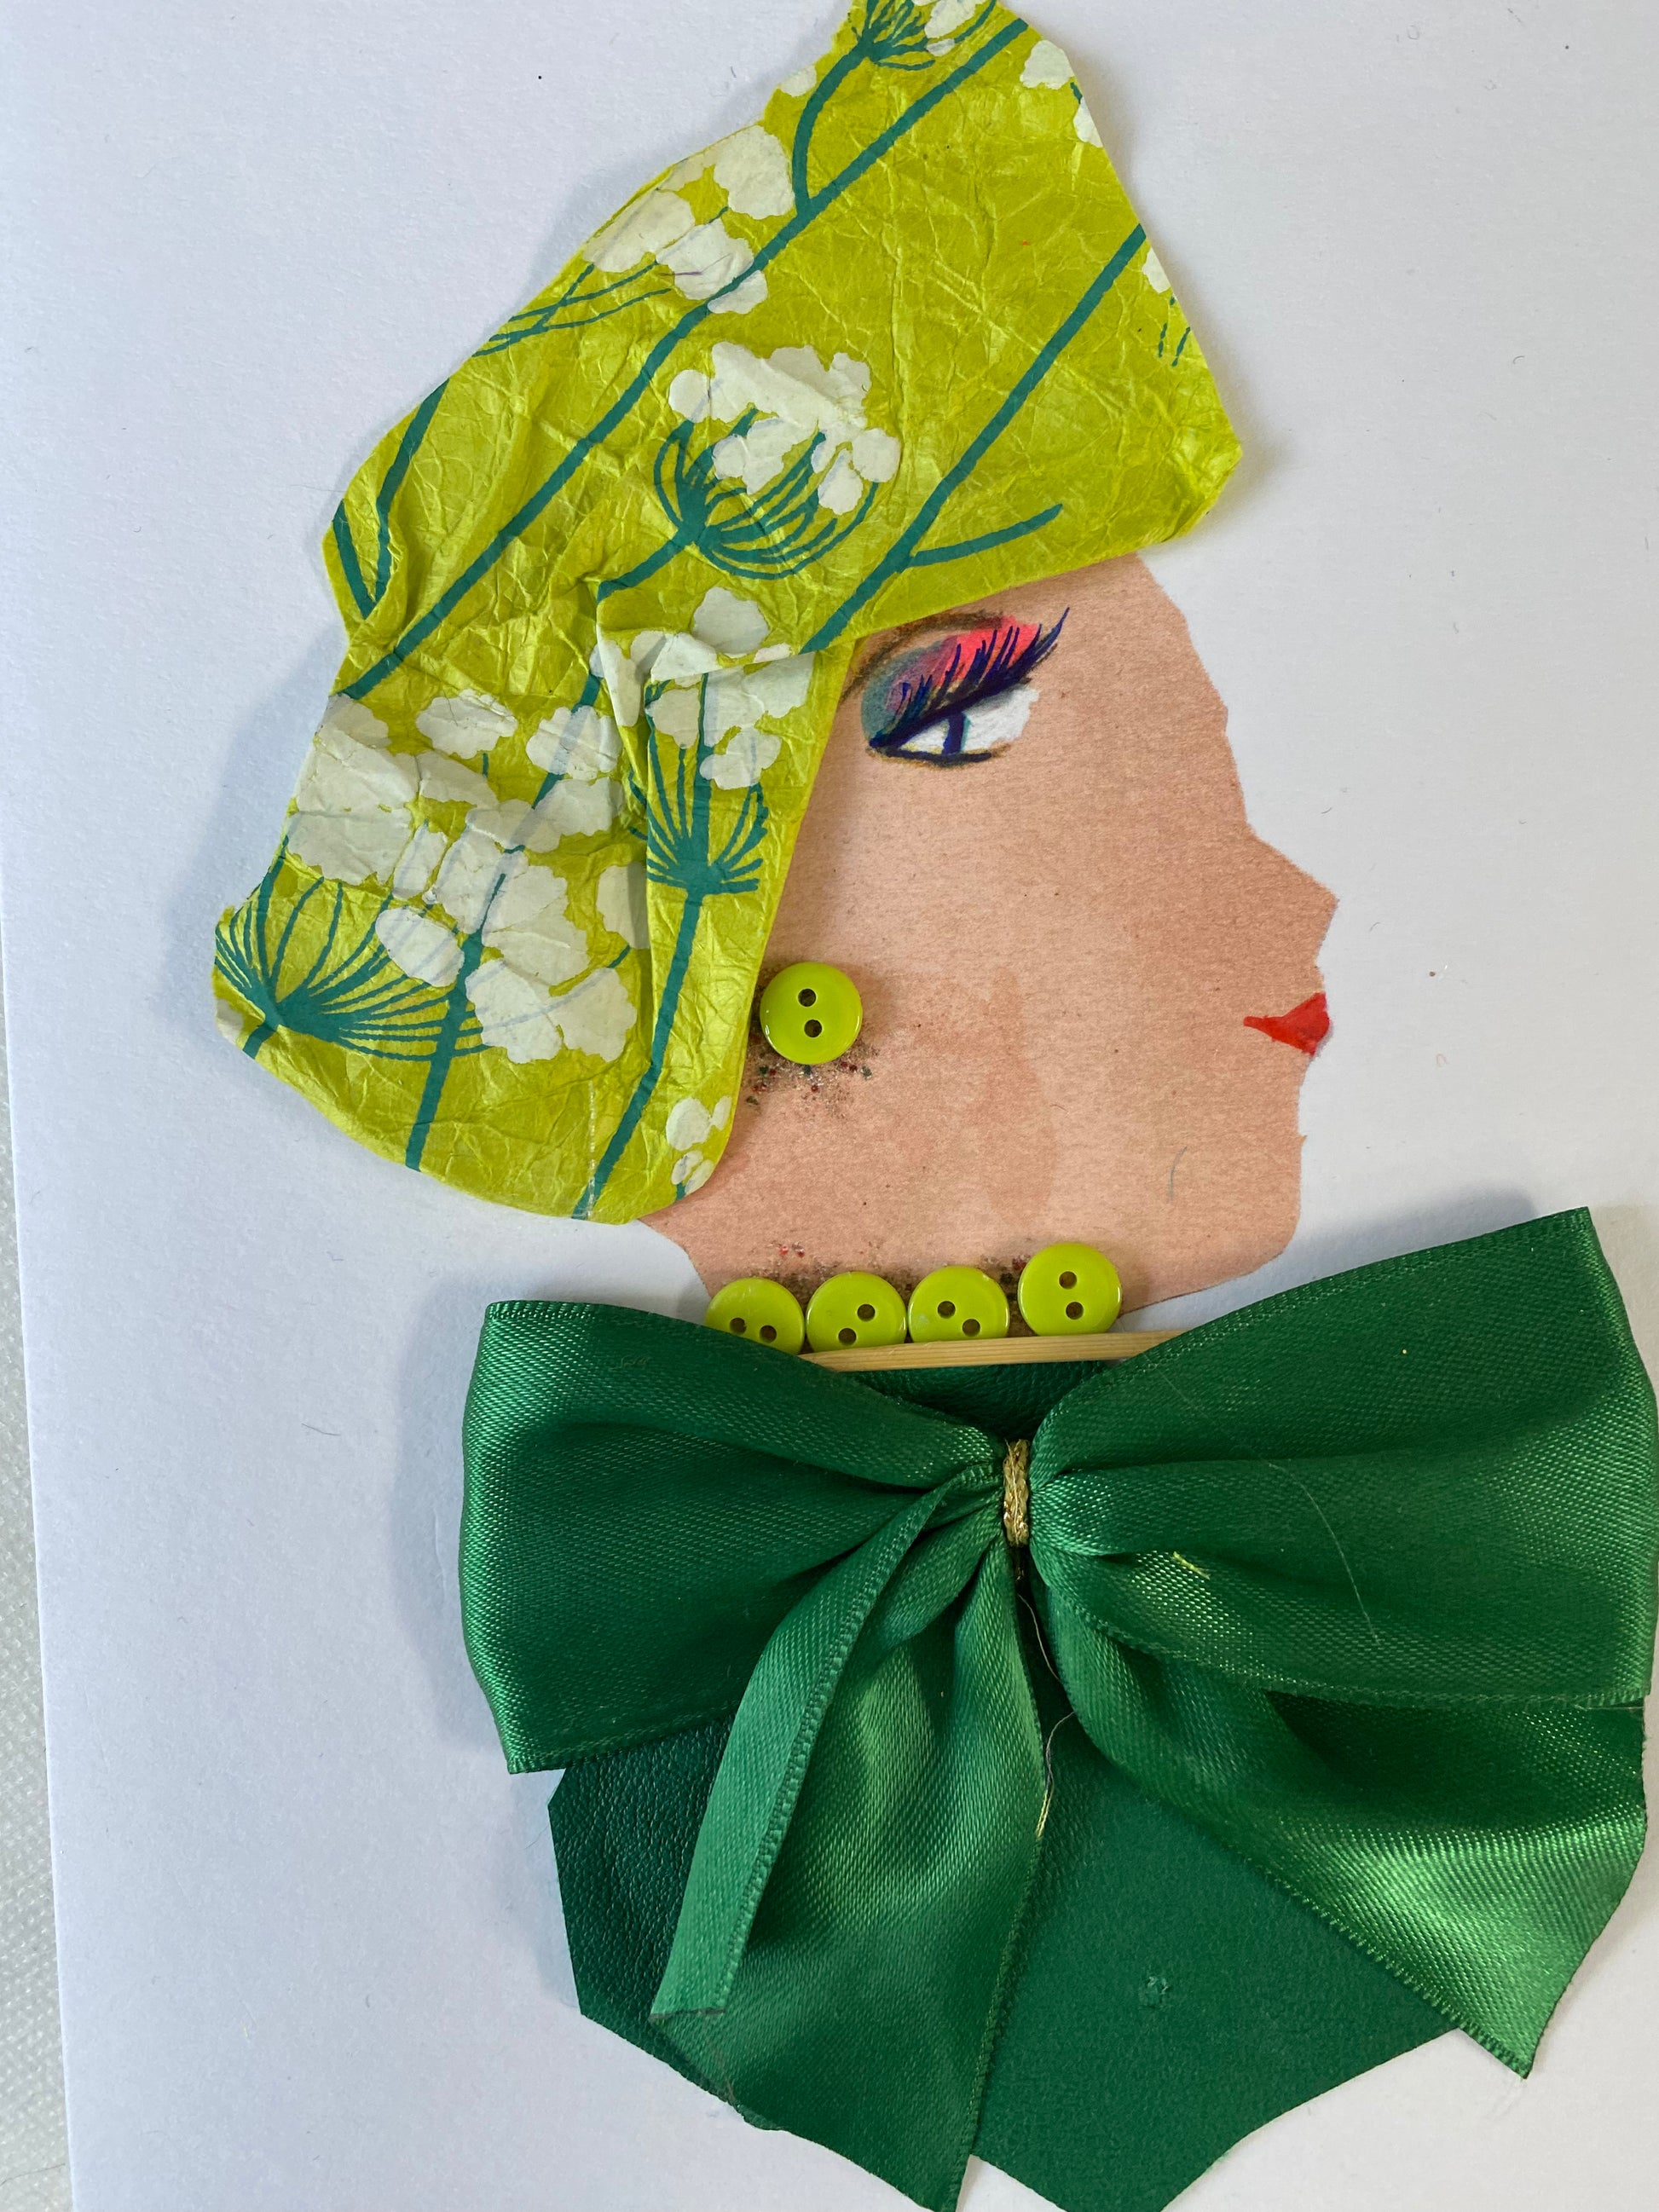 I designed this card of a woman named Goldie Glorious. She has a white skin tone and is wearing light green headwrap with white flowers on it. She wears a silk emerald green blouse with a silk green bow. She wears pretty light green button jewellery. 